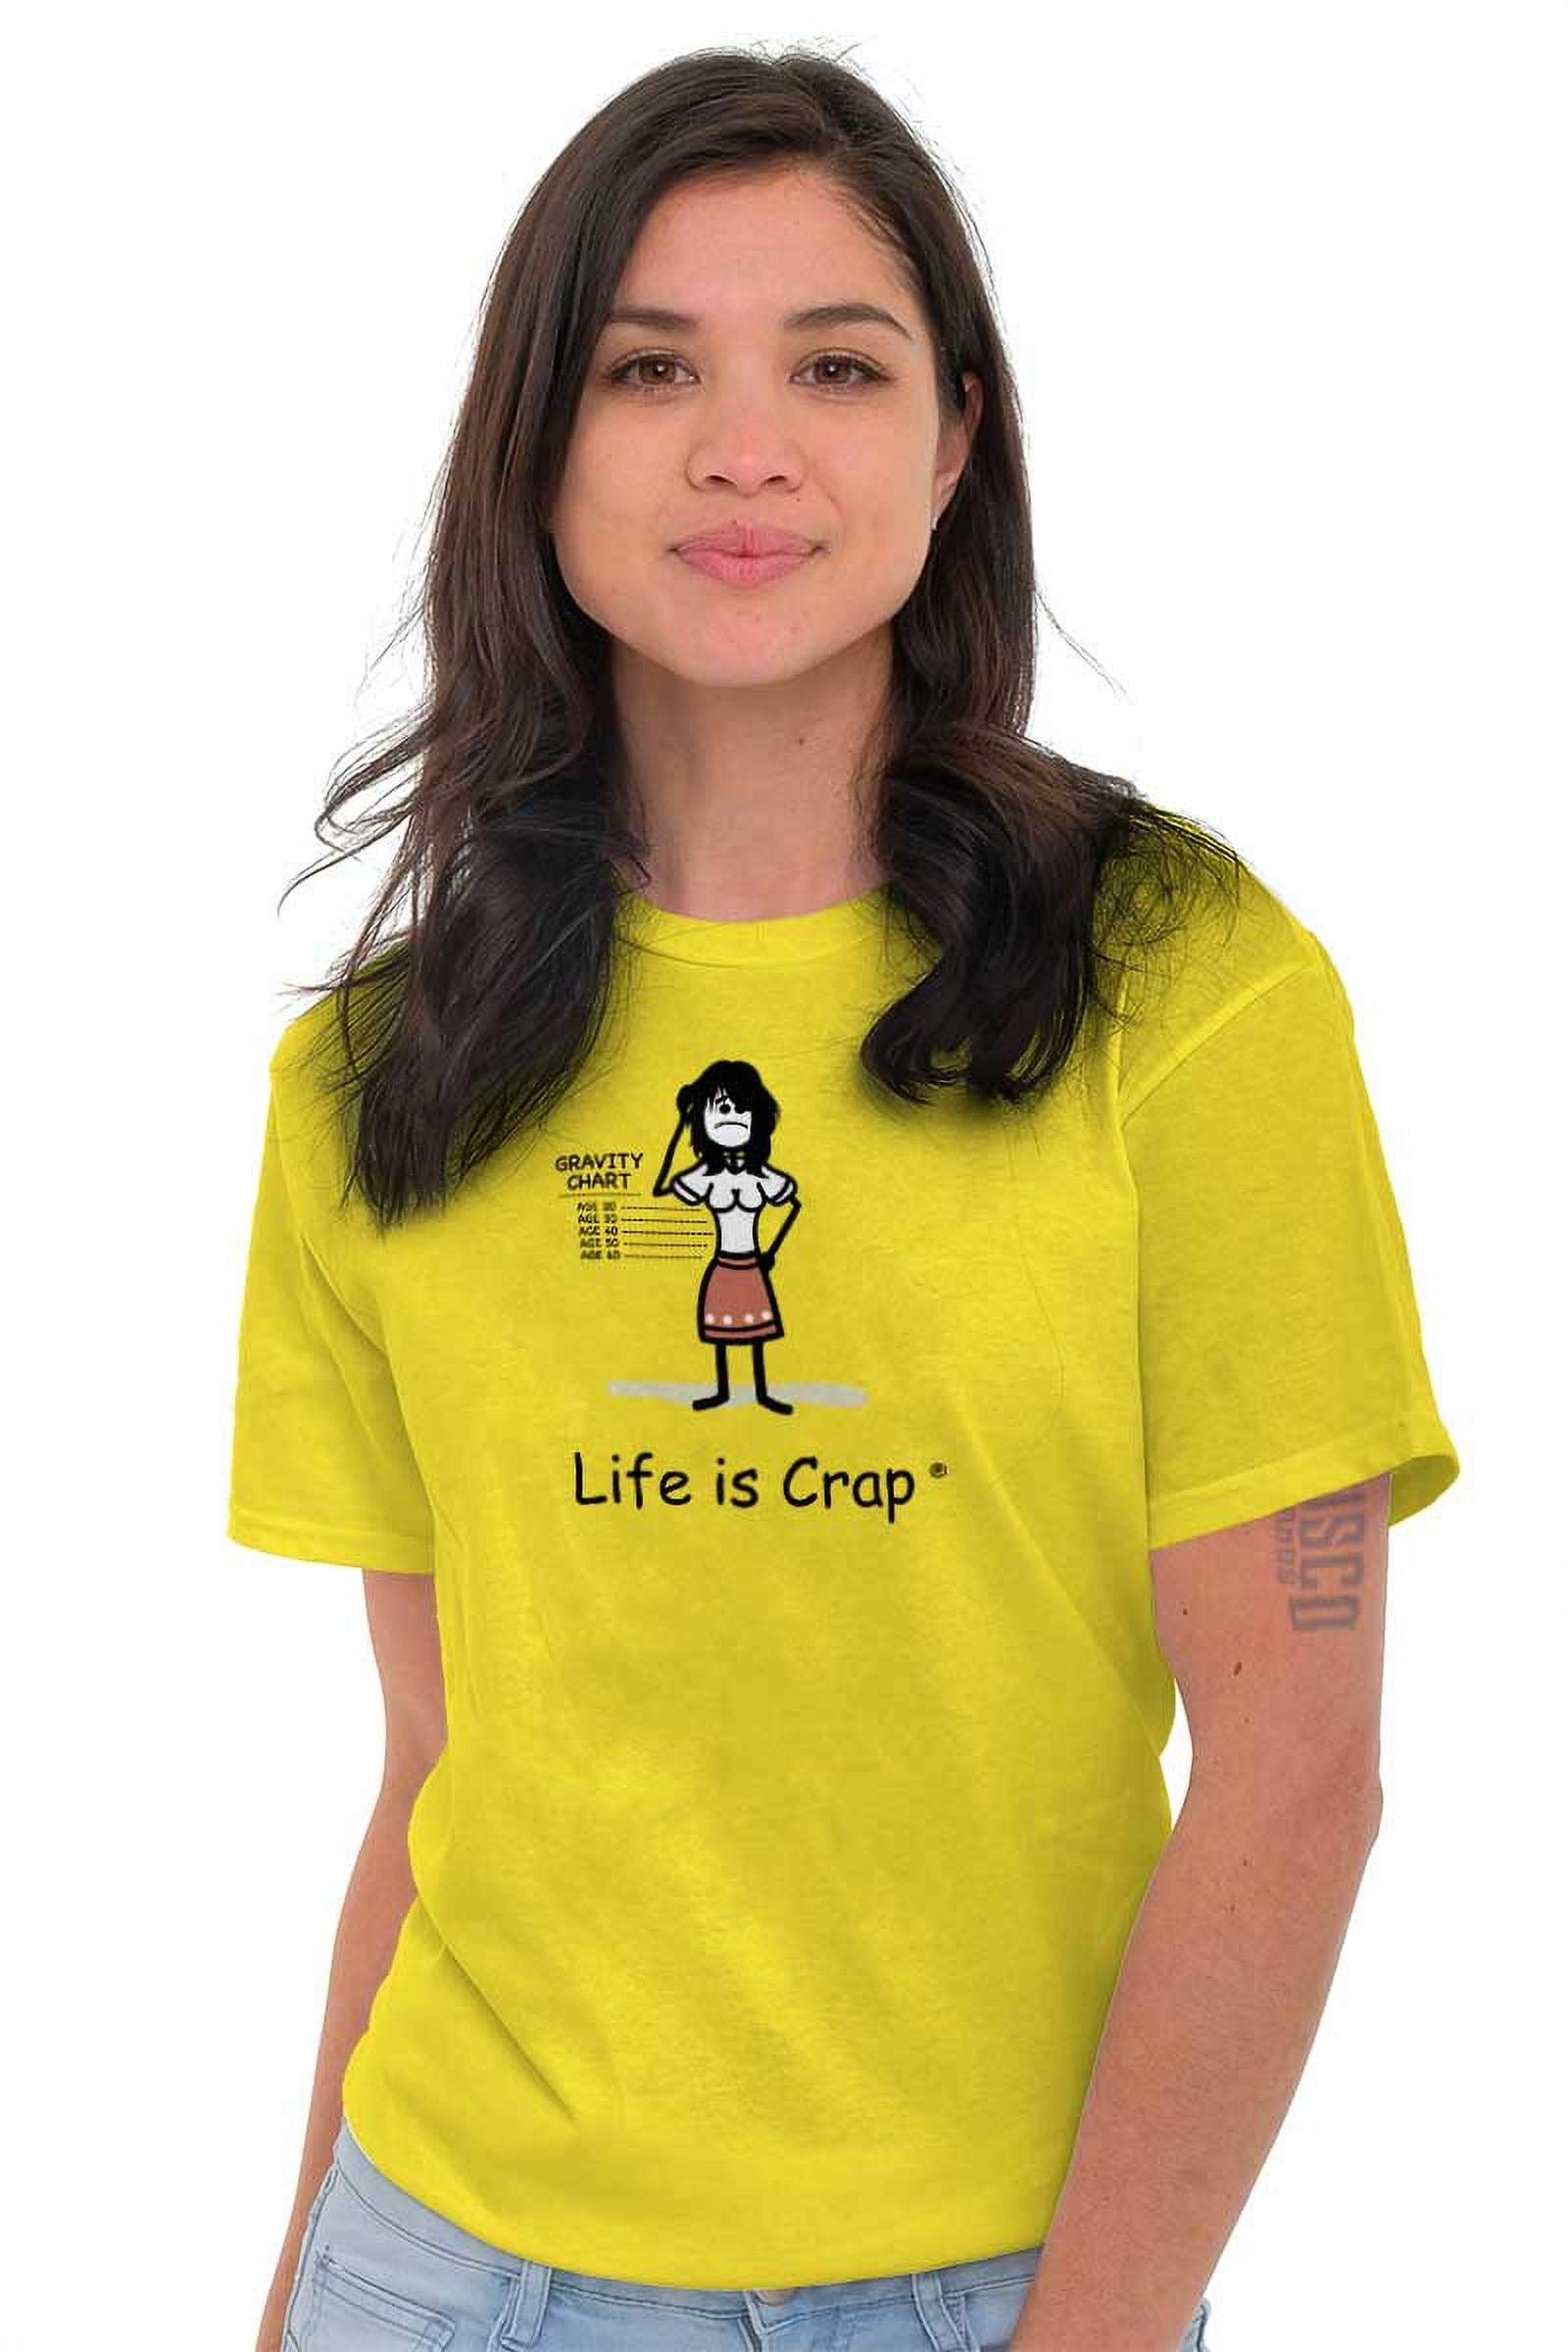 Saggy Boobs Matter All Over Graphic Tee by EveTrickettDesigns